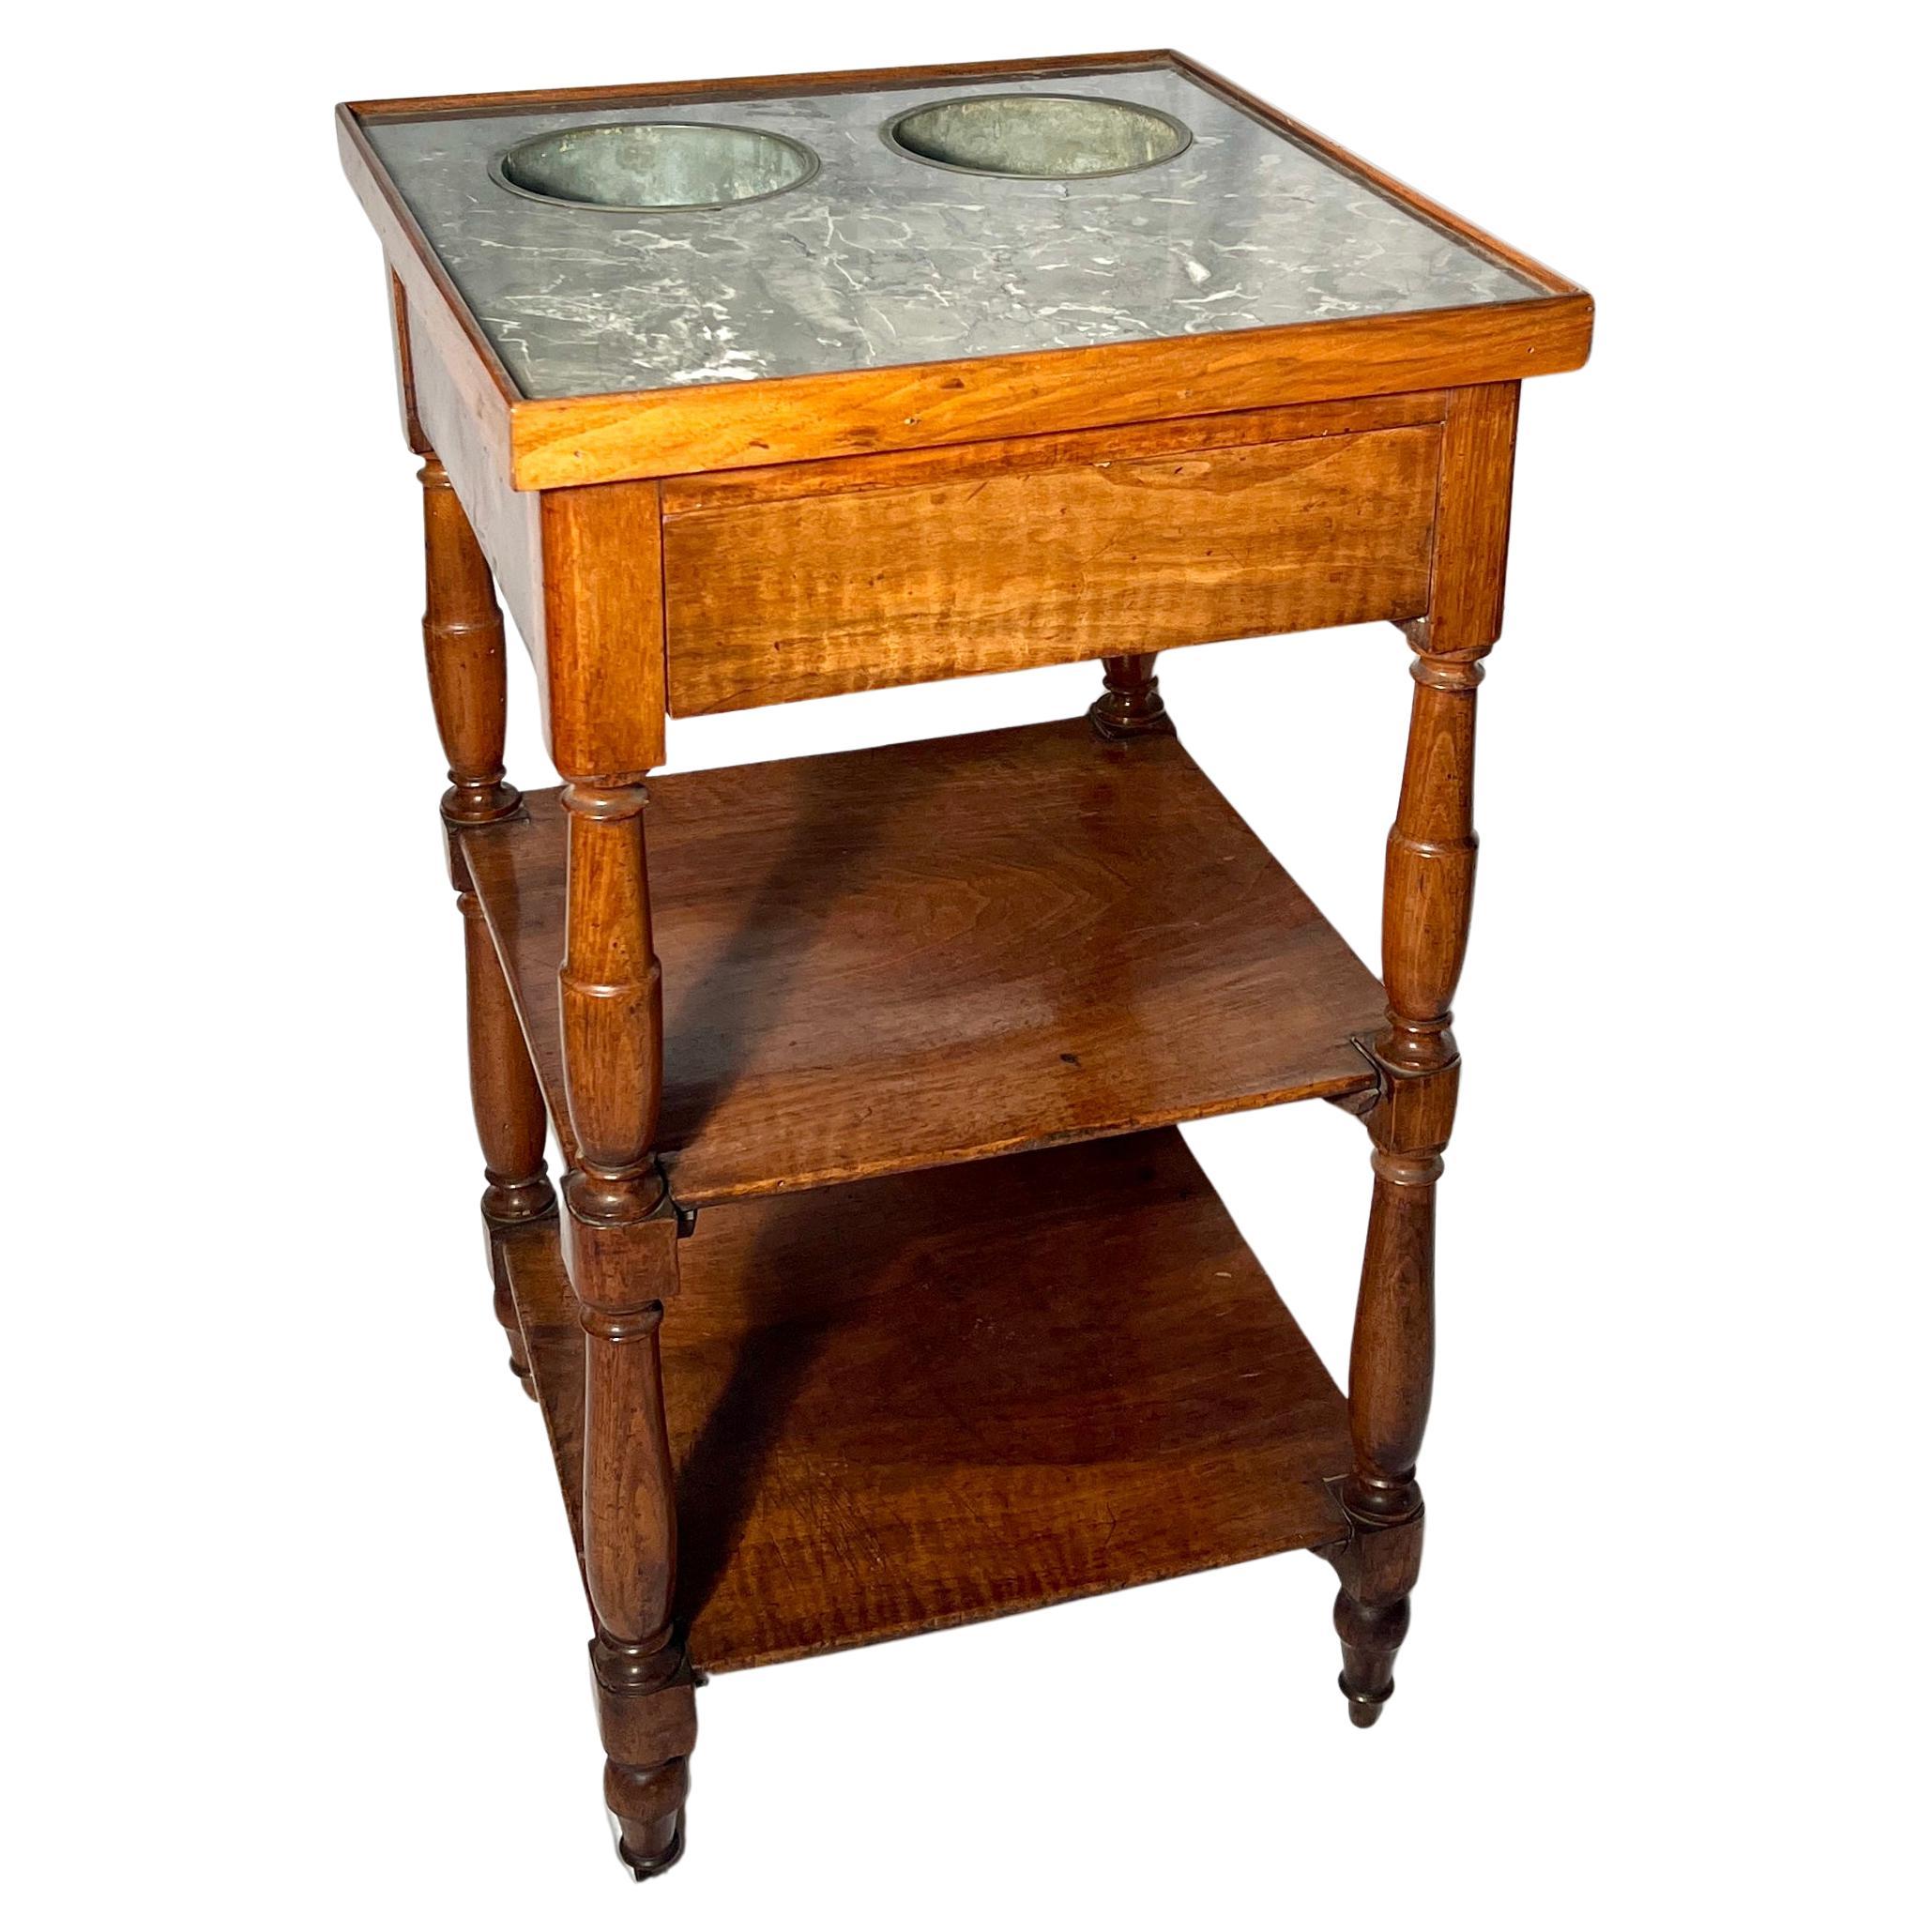 Antique French Provincial Marble Rafraîchissoir Wine Table & Coolers, Circa 1900 For Sale